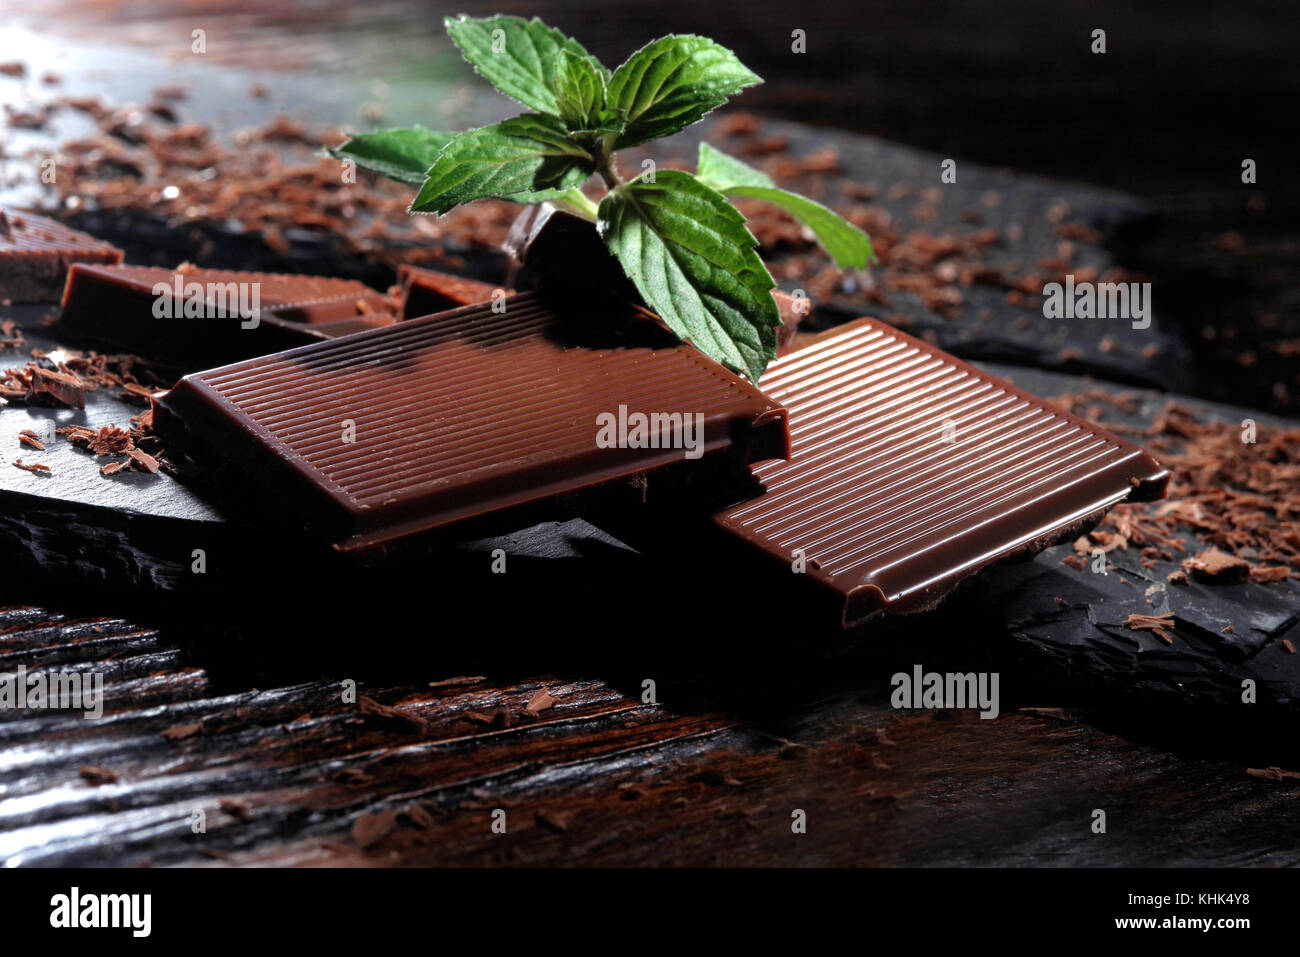 Broken dark chocolate and chocolate flakes on a wooden table Stock Photo